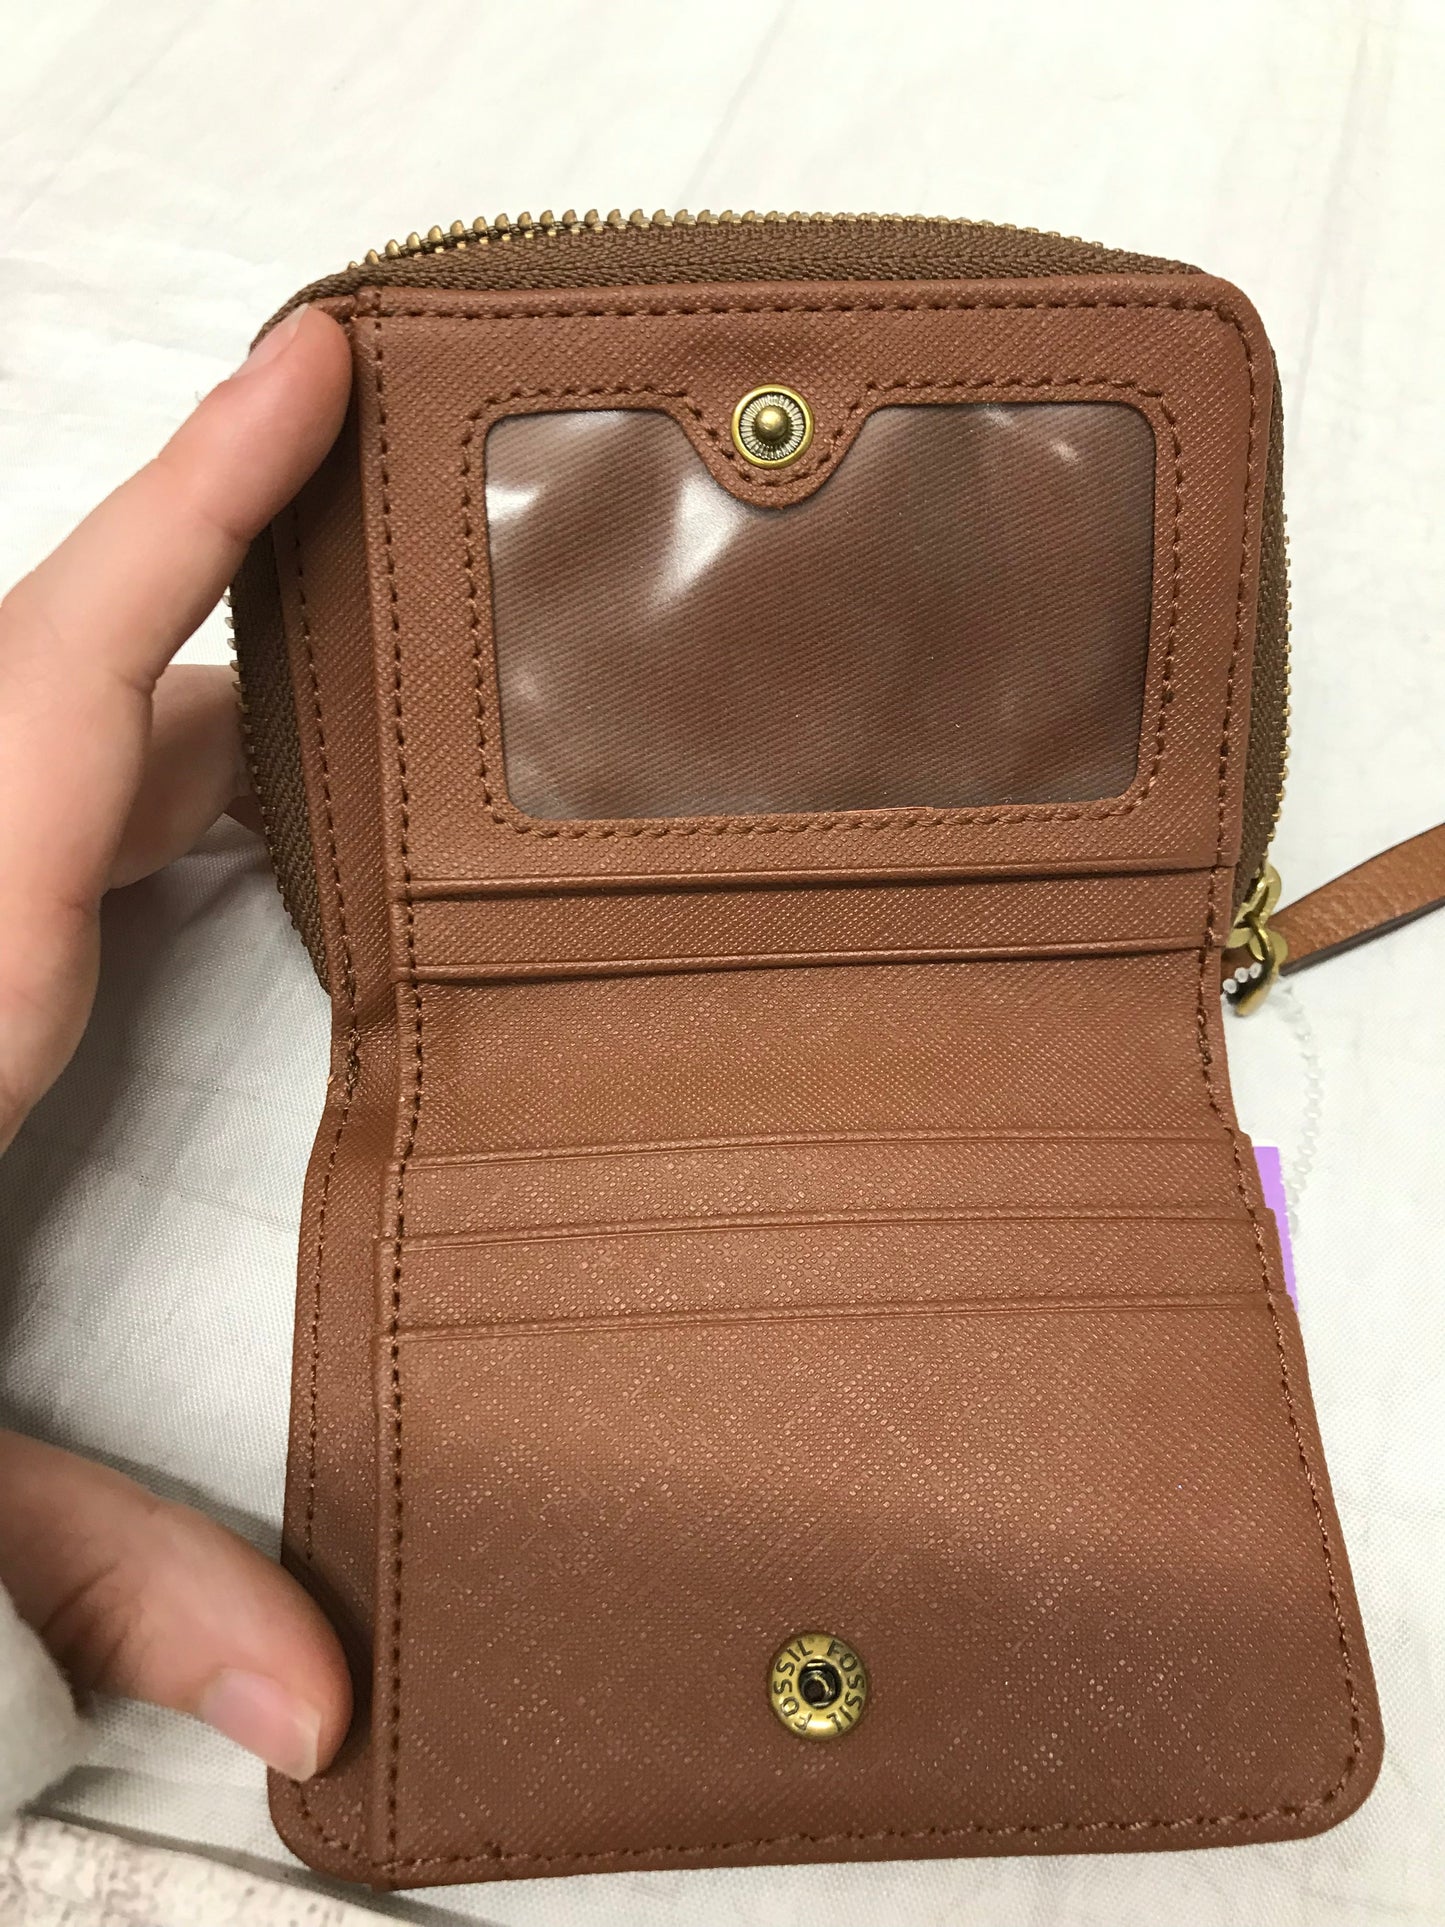 Wallet By Fossil, Size: Small